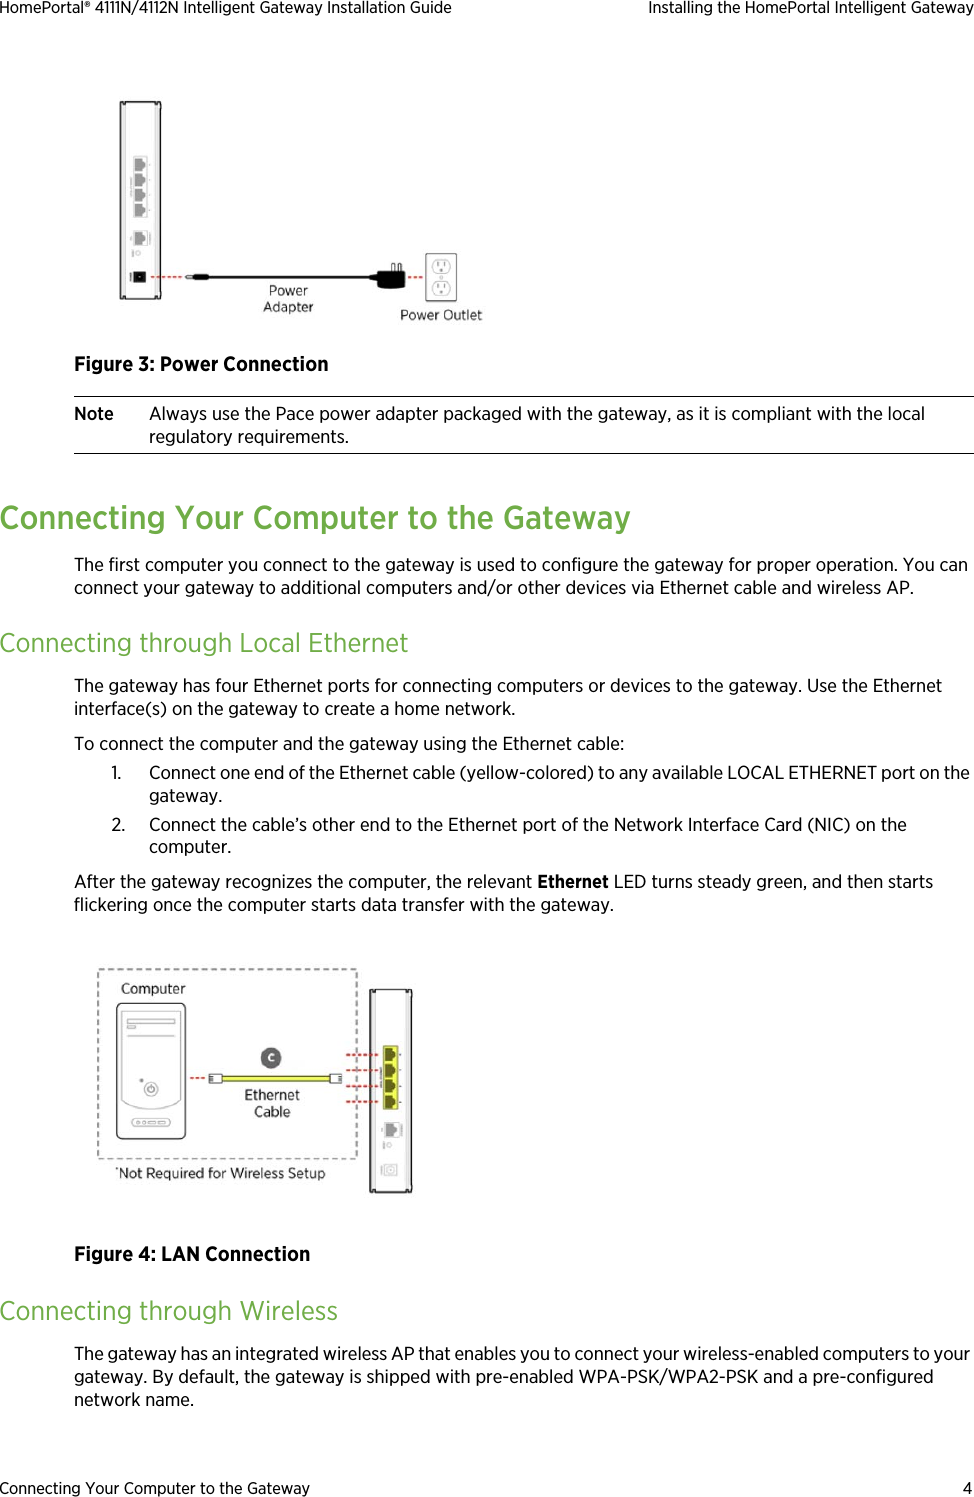 Connecting Your Computer to the Gateway 4HomePortal® 4111N/4112N Intelligent Gateway Installation Guide Installing the HomePortal Intelligent GatewayFigure 3: Power ConnectionNote Always use the Pace power adapter packaged with the gateway, as it is compliant with the local regulatory requirements.Connecting Your Computer to the GatewayThe first computer you connect to the gateway is used to configure the gateway for proper operation. You can connect your gateway to additional computers and/or other devices via Ethernet cable and wireless AP.Connecting through Local EthernetThe gateway has four Ethernet ports for connecting computers or devices to the gateway. Use the Ethernet interface(s) on the gateway to create a home network. To connect the computer and the gateway using the Ethernet cable:1. Connect one end of the Ethernet cable (yellow-colored) to any available LOCAL ETHERNET port on the gateway.2. Connect the cable’s other end to the Ethernet port of the Network Interface Card (NIC) on the computer.After the gateway recognizes the computer, the relevant Ethernet LED turns steady green, and then starts flickering once the computer starts data transfer with the gateway.Figure 4: LAN ConnectionConnecting through WirelessThe gateway has an integrated wireless AP that enables you to connect your wireless-enabled computers to your gateway. By default, the gateway is shipped with pre-enabled WPA-PSK/WPA2-PSK and a pre-configured network name.